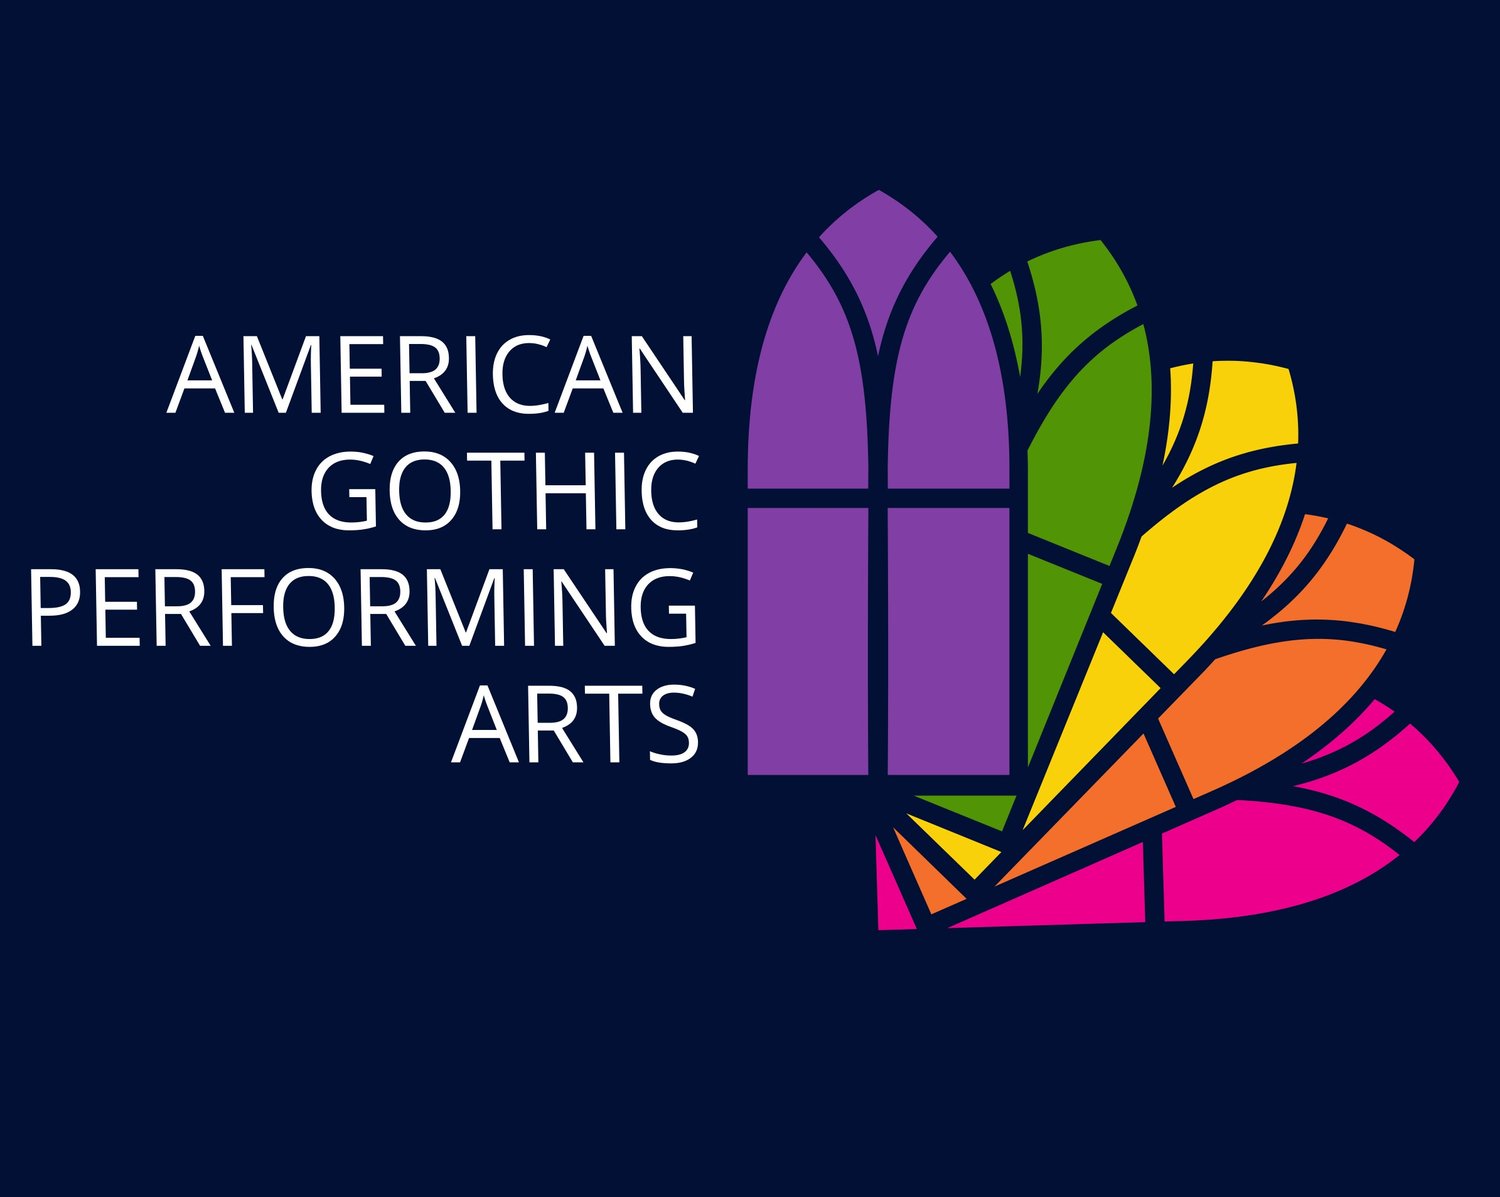 American Gothic Performing Arts